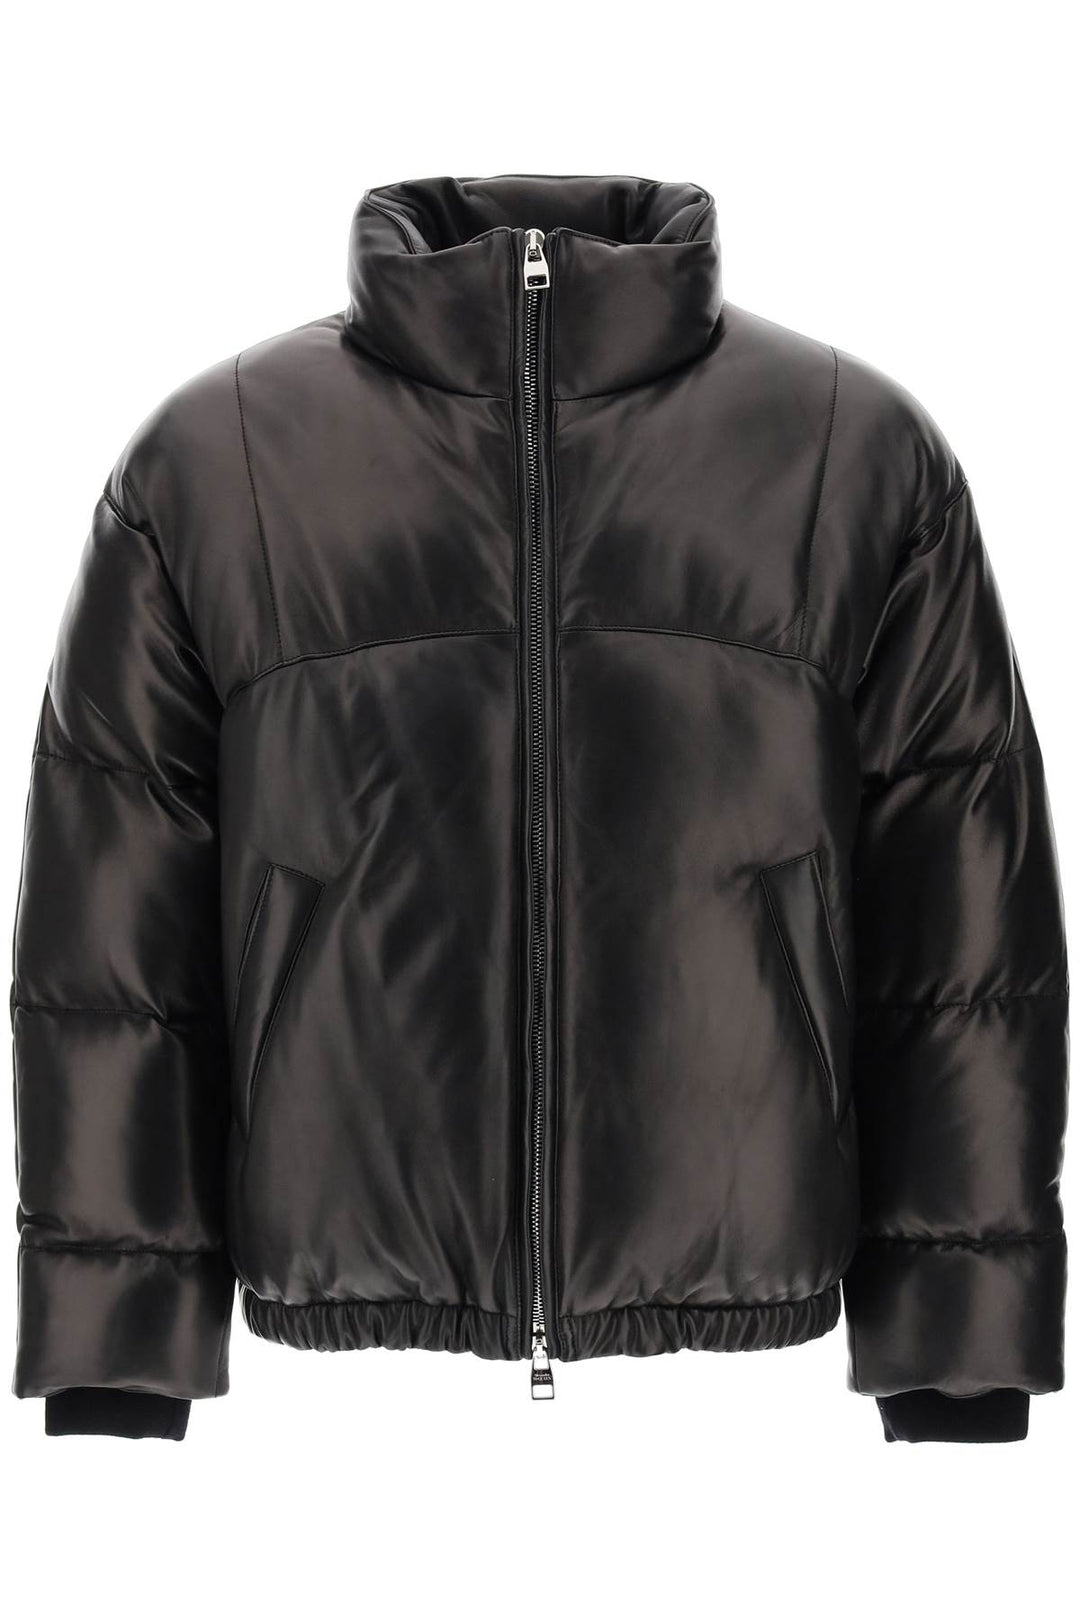 Alexander Mcqueen Quilted Leather Puffer Jacket   Nero